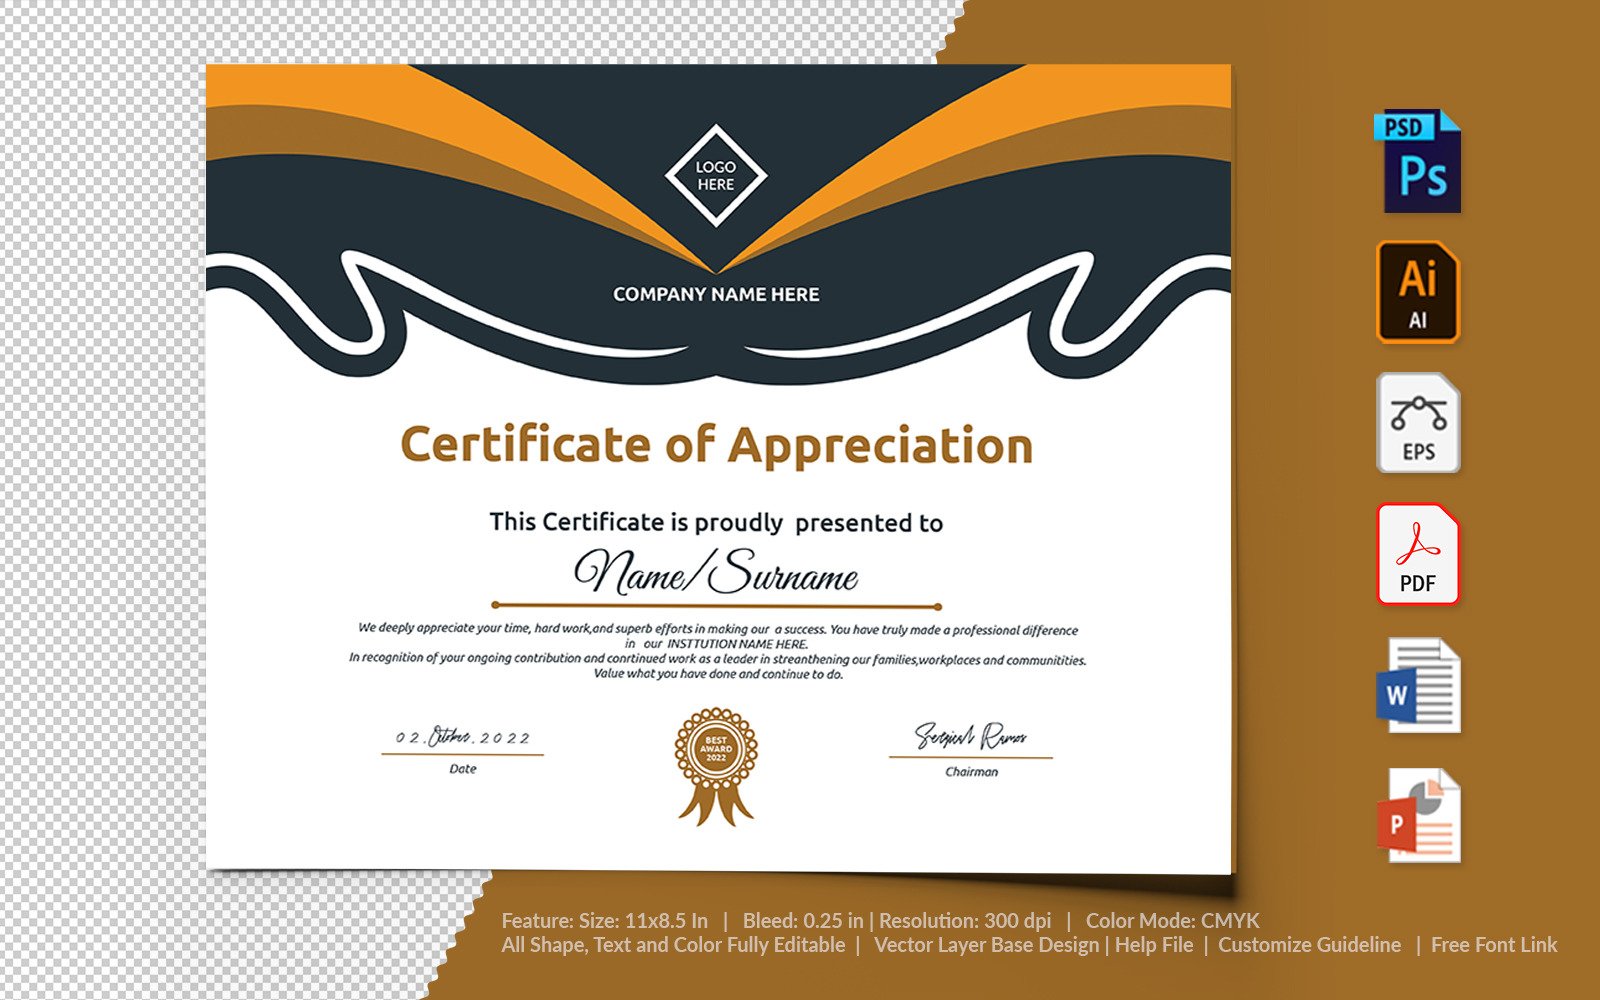 17-certificate-of-appreciation-content-free-to-edit-download-mobile